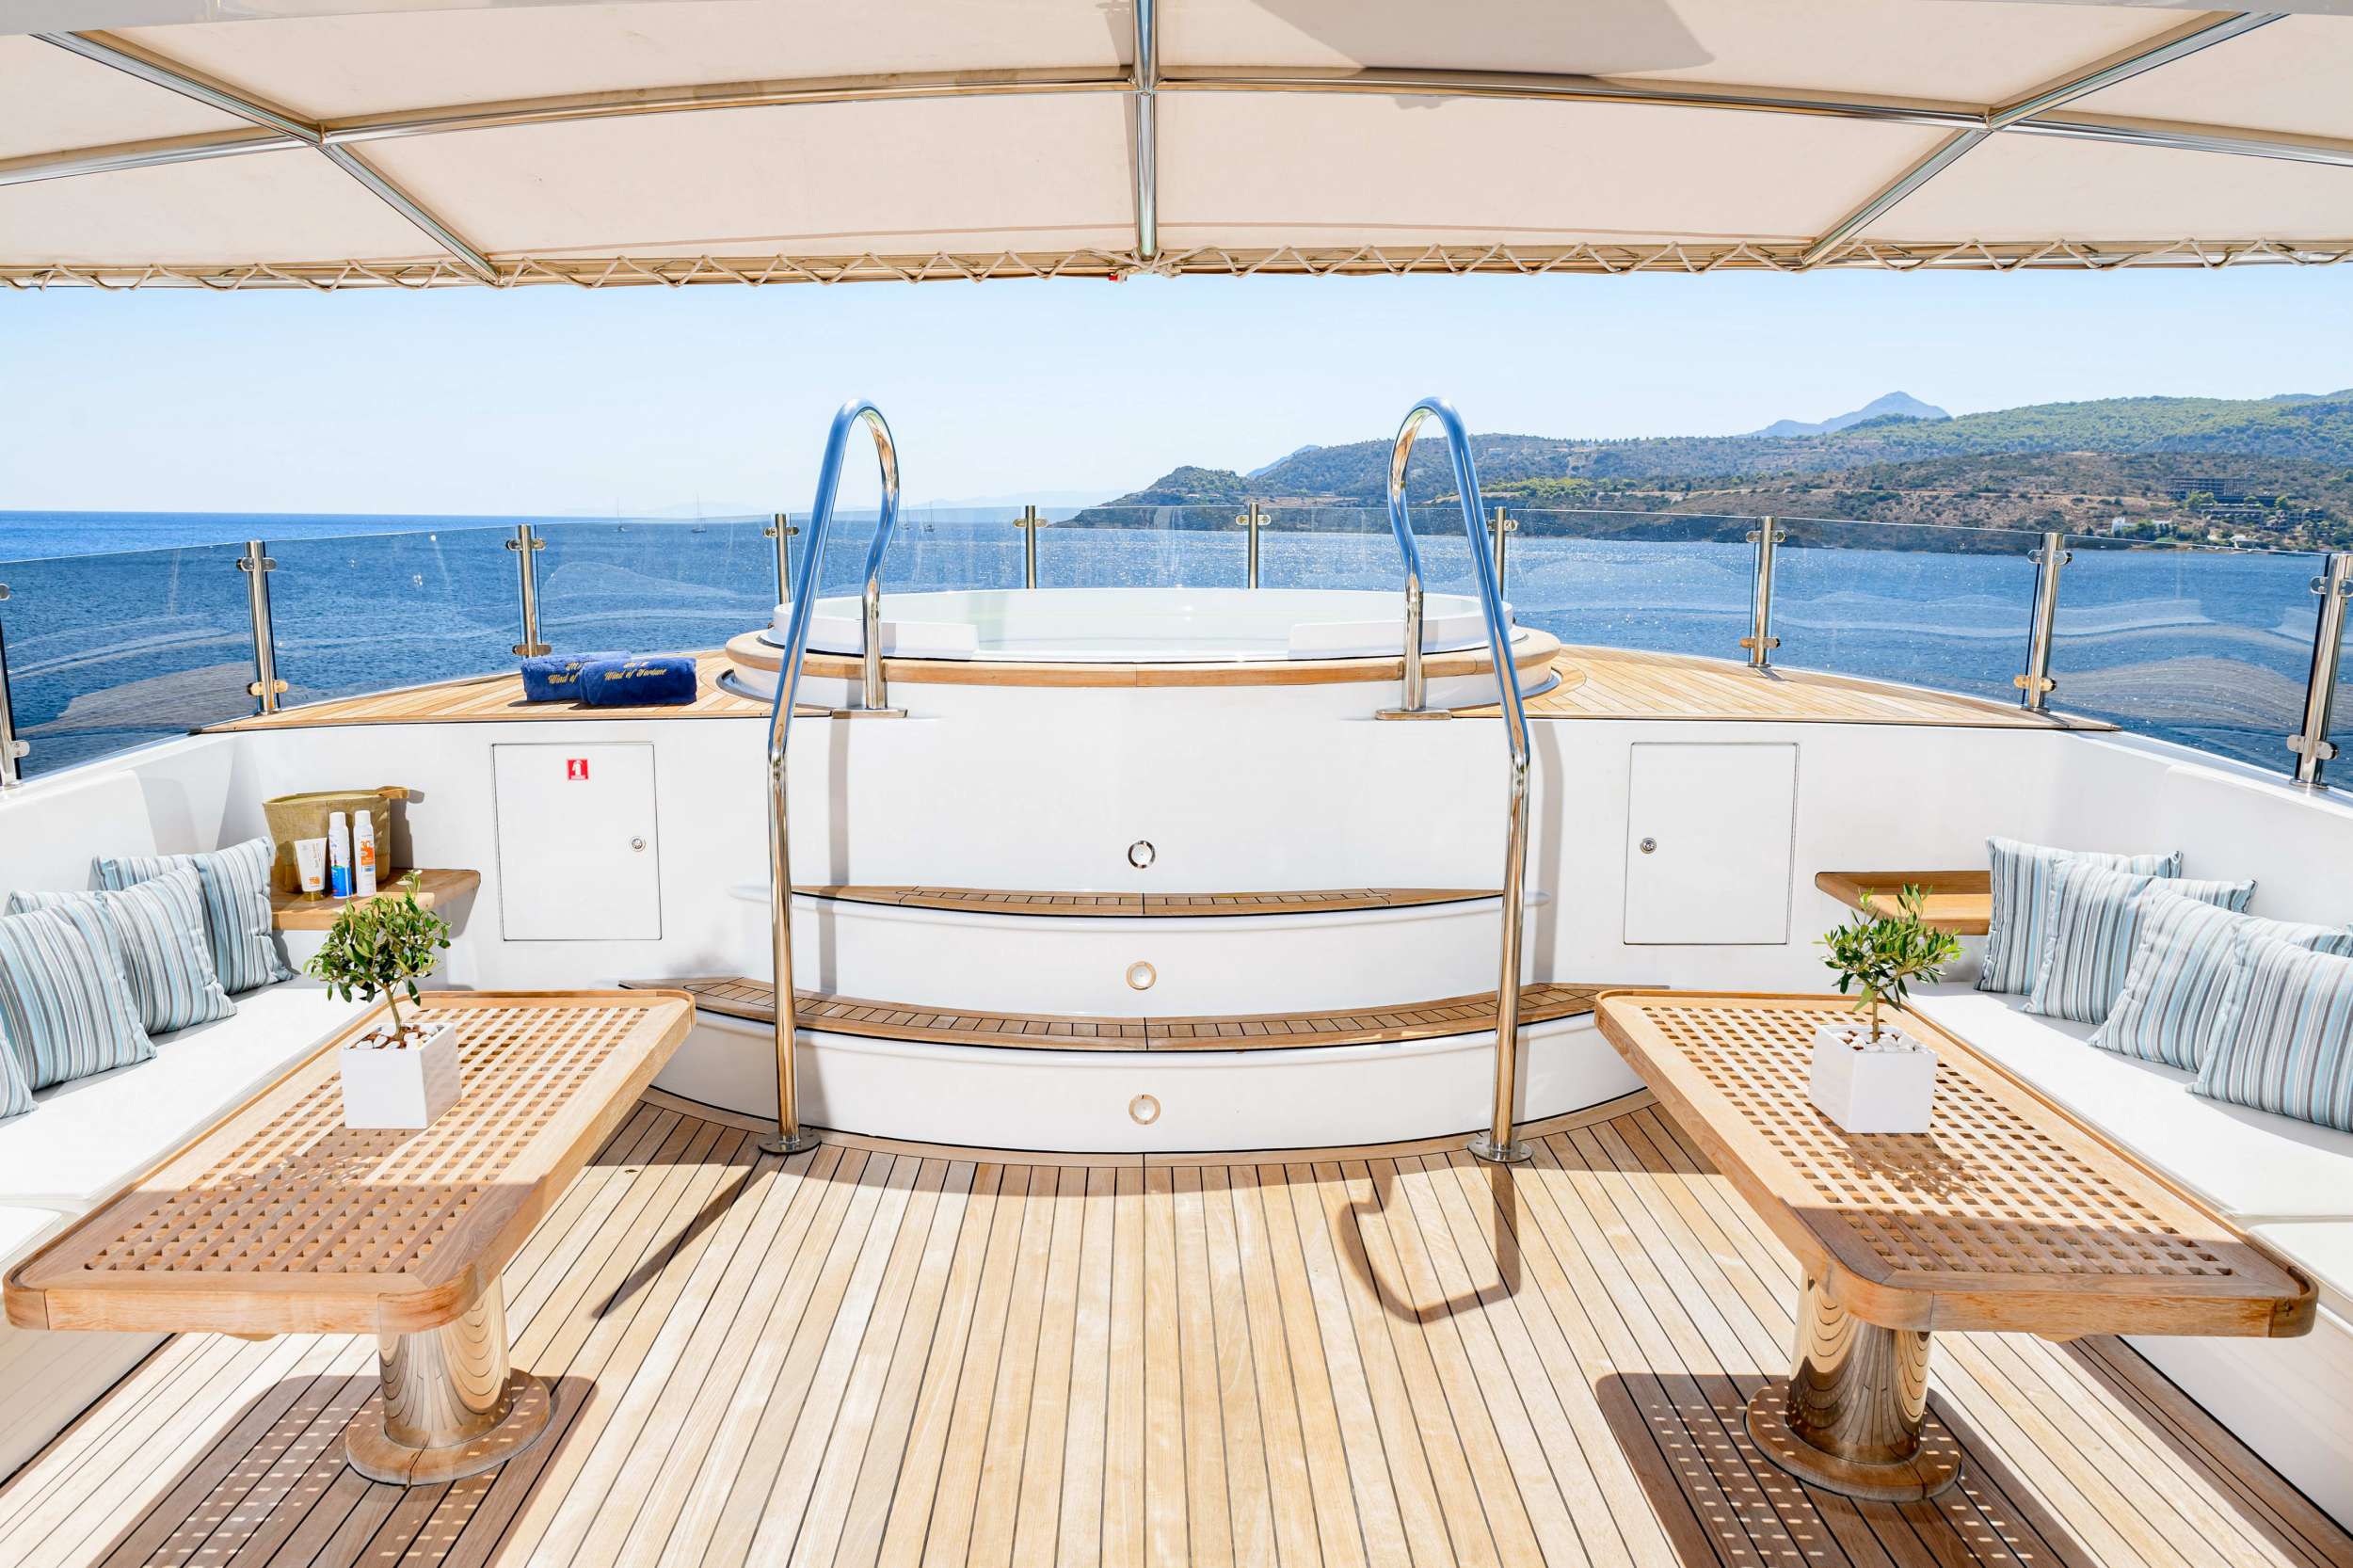 WIND OF FORTUNE Yacht Charter - Shaded Sun Deck - Jacuzzi